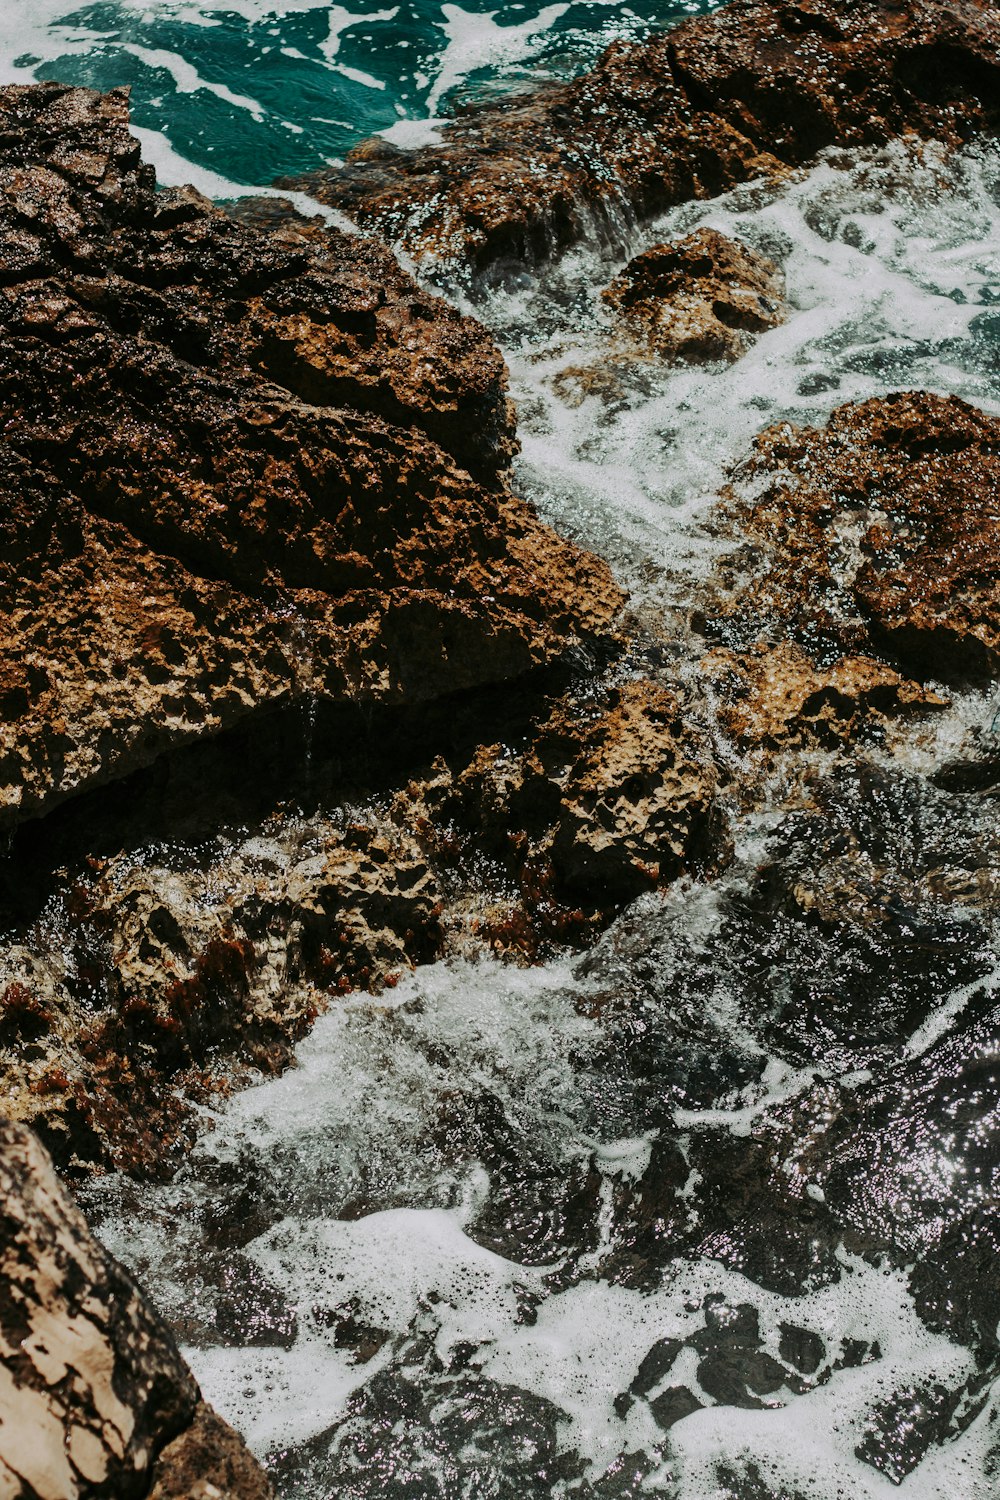 brown rocky shore with water waves